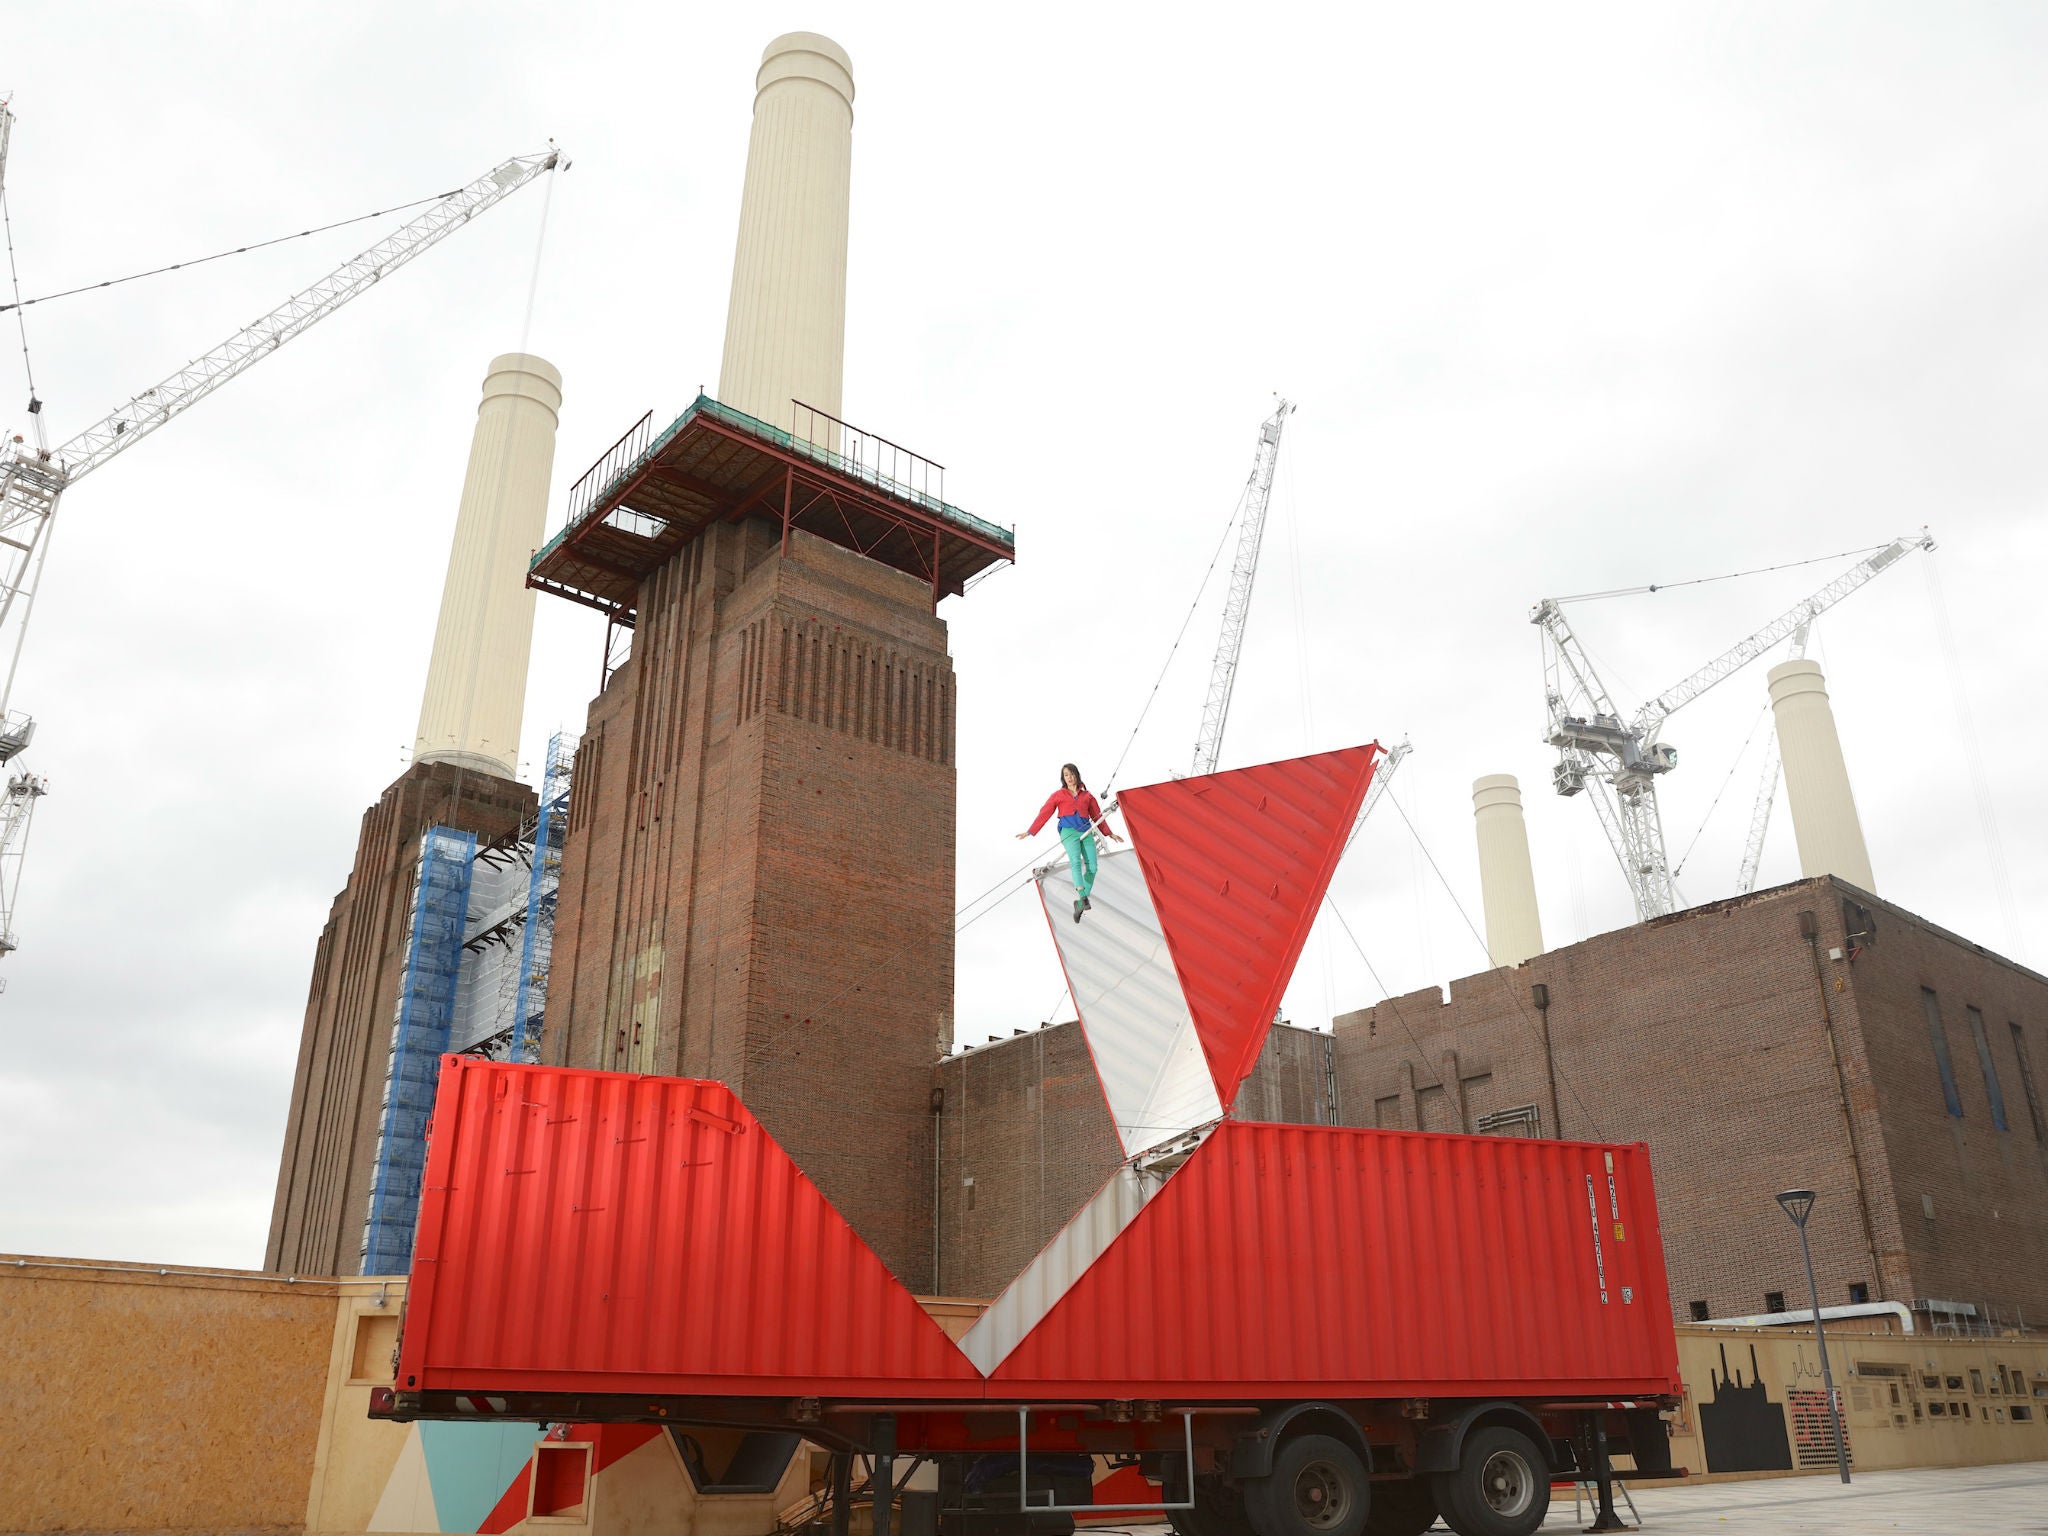 Satchie Noro performs 'Origami' at Battersea Power Station